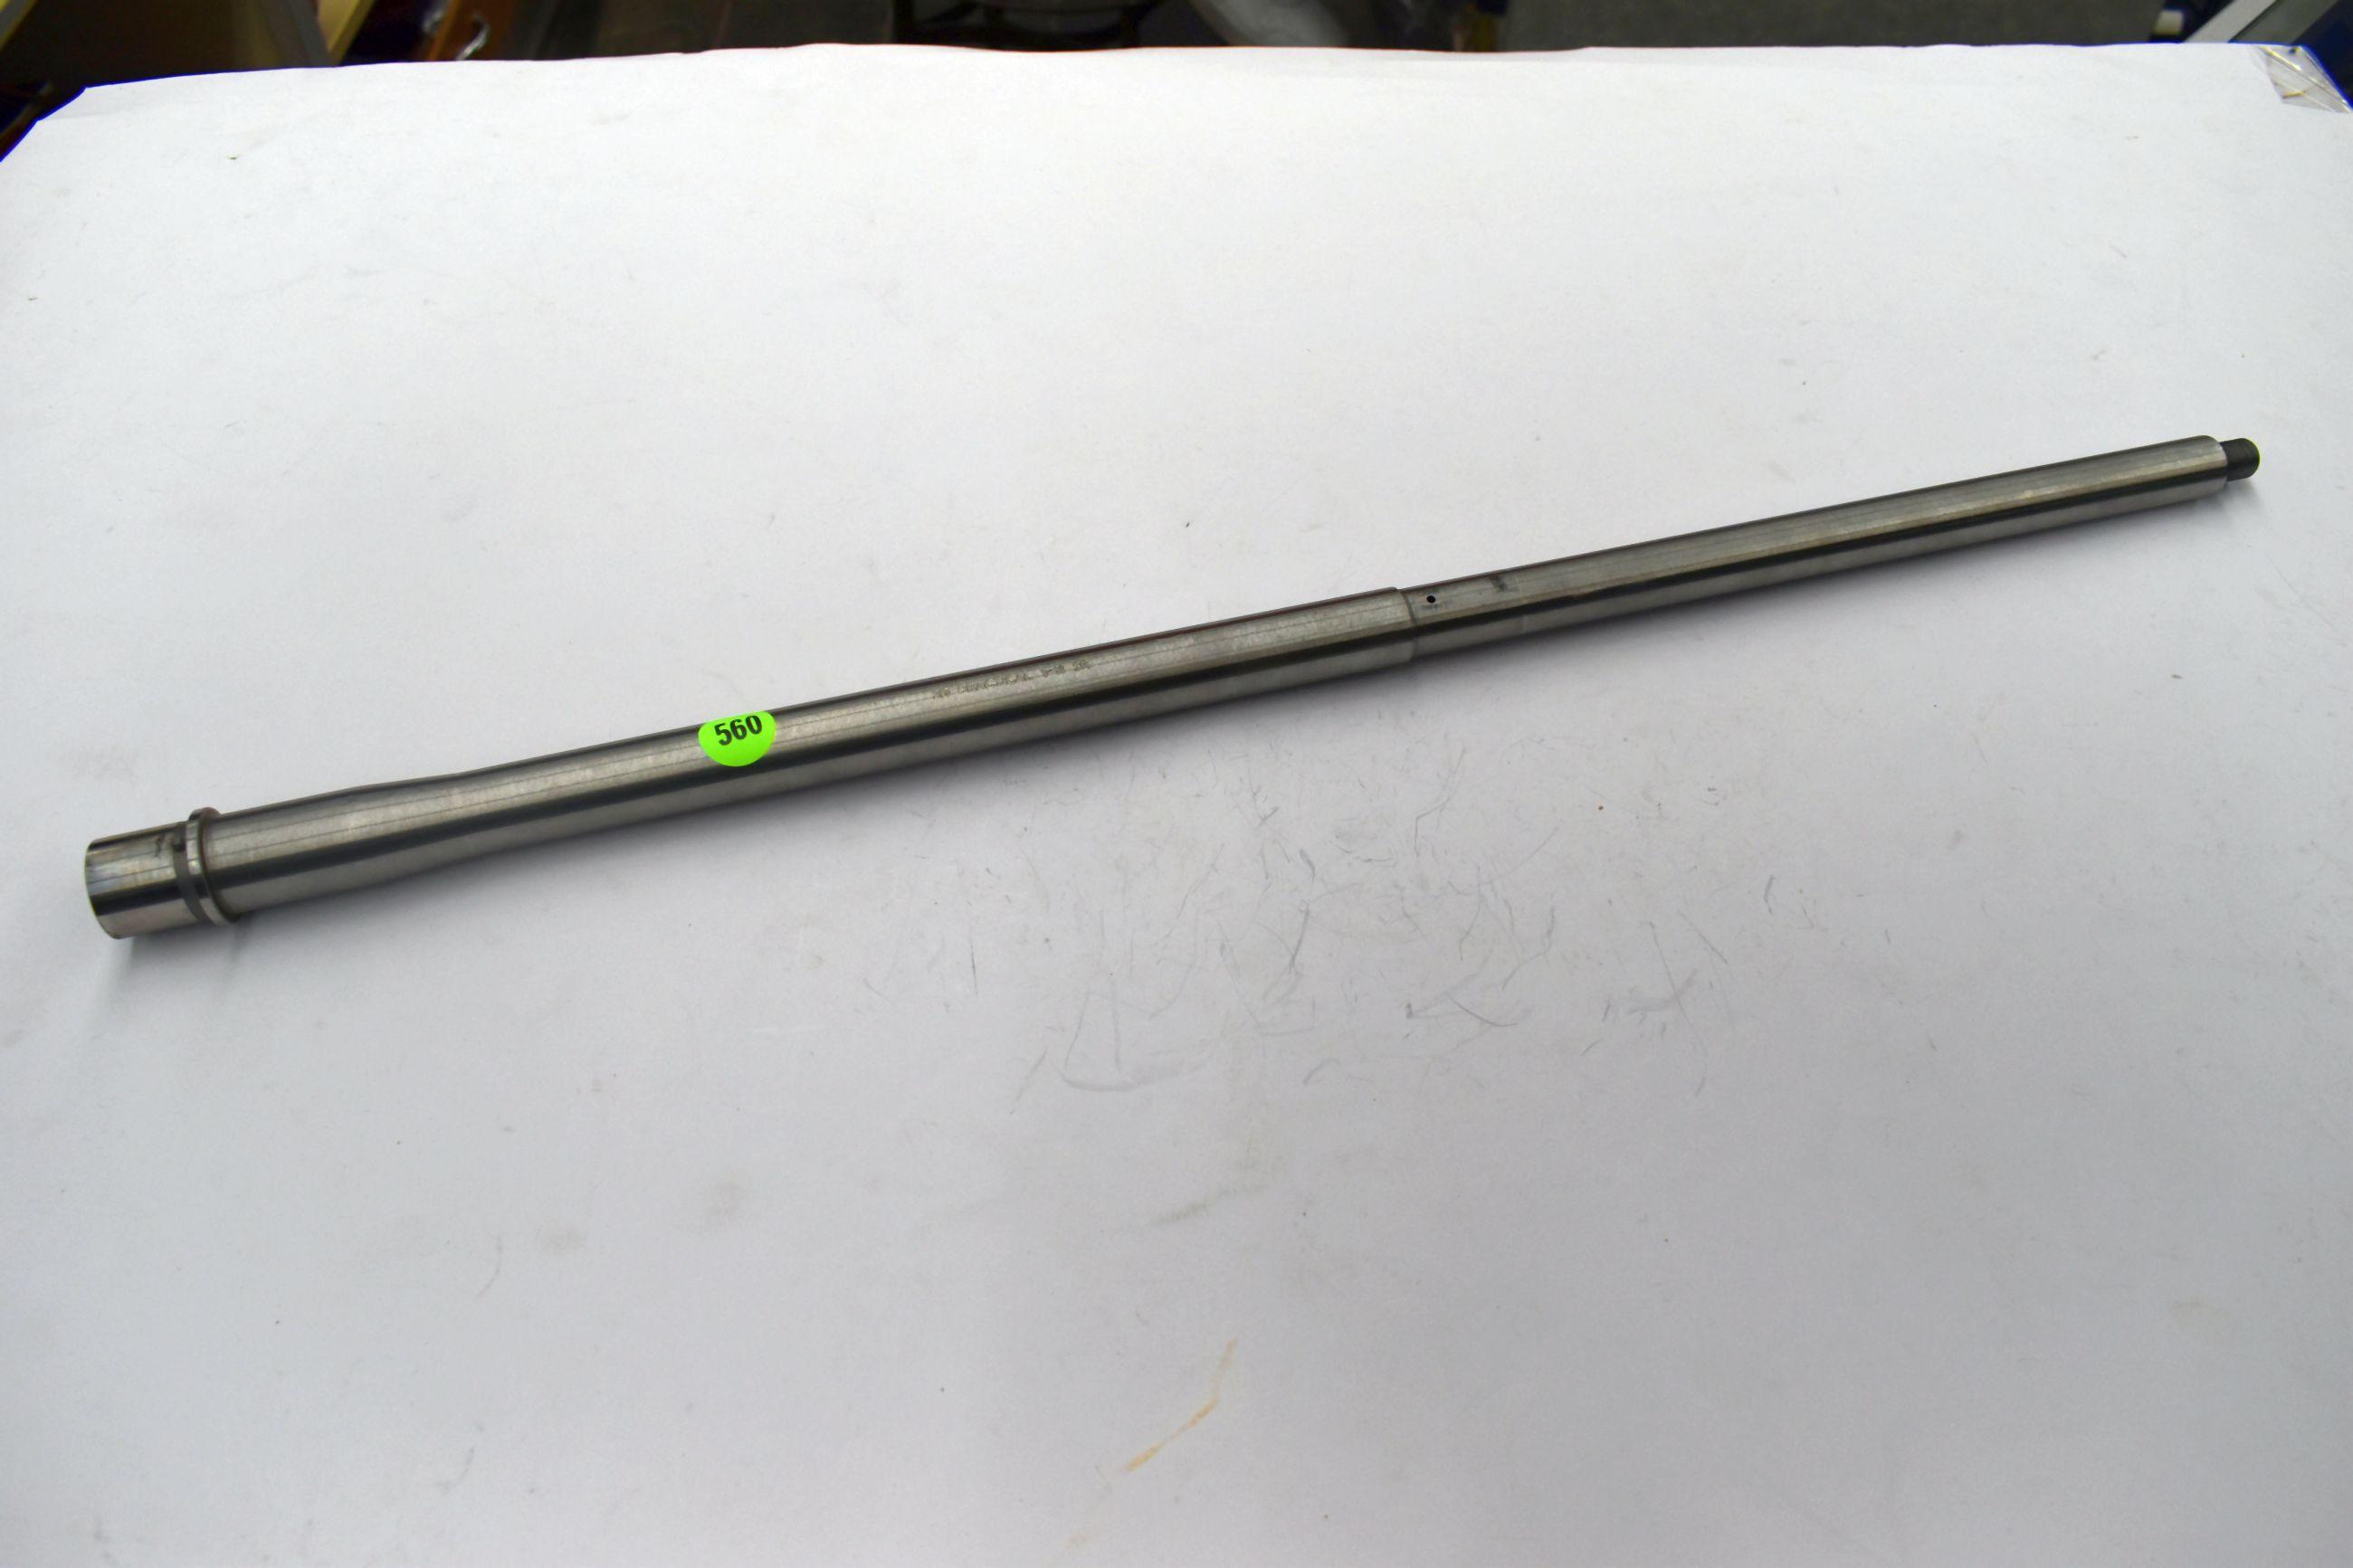 .22 Practical Cal. 1-115R, 21'' Stainless Barrel, Threaded End